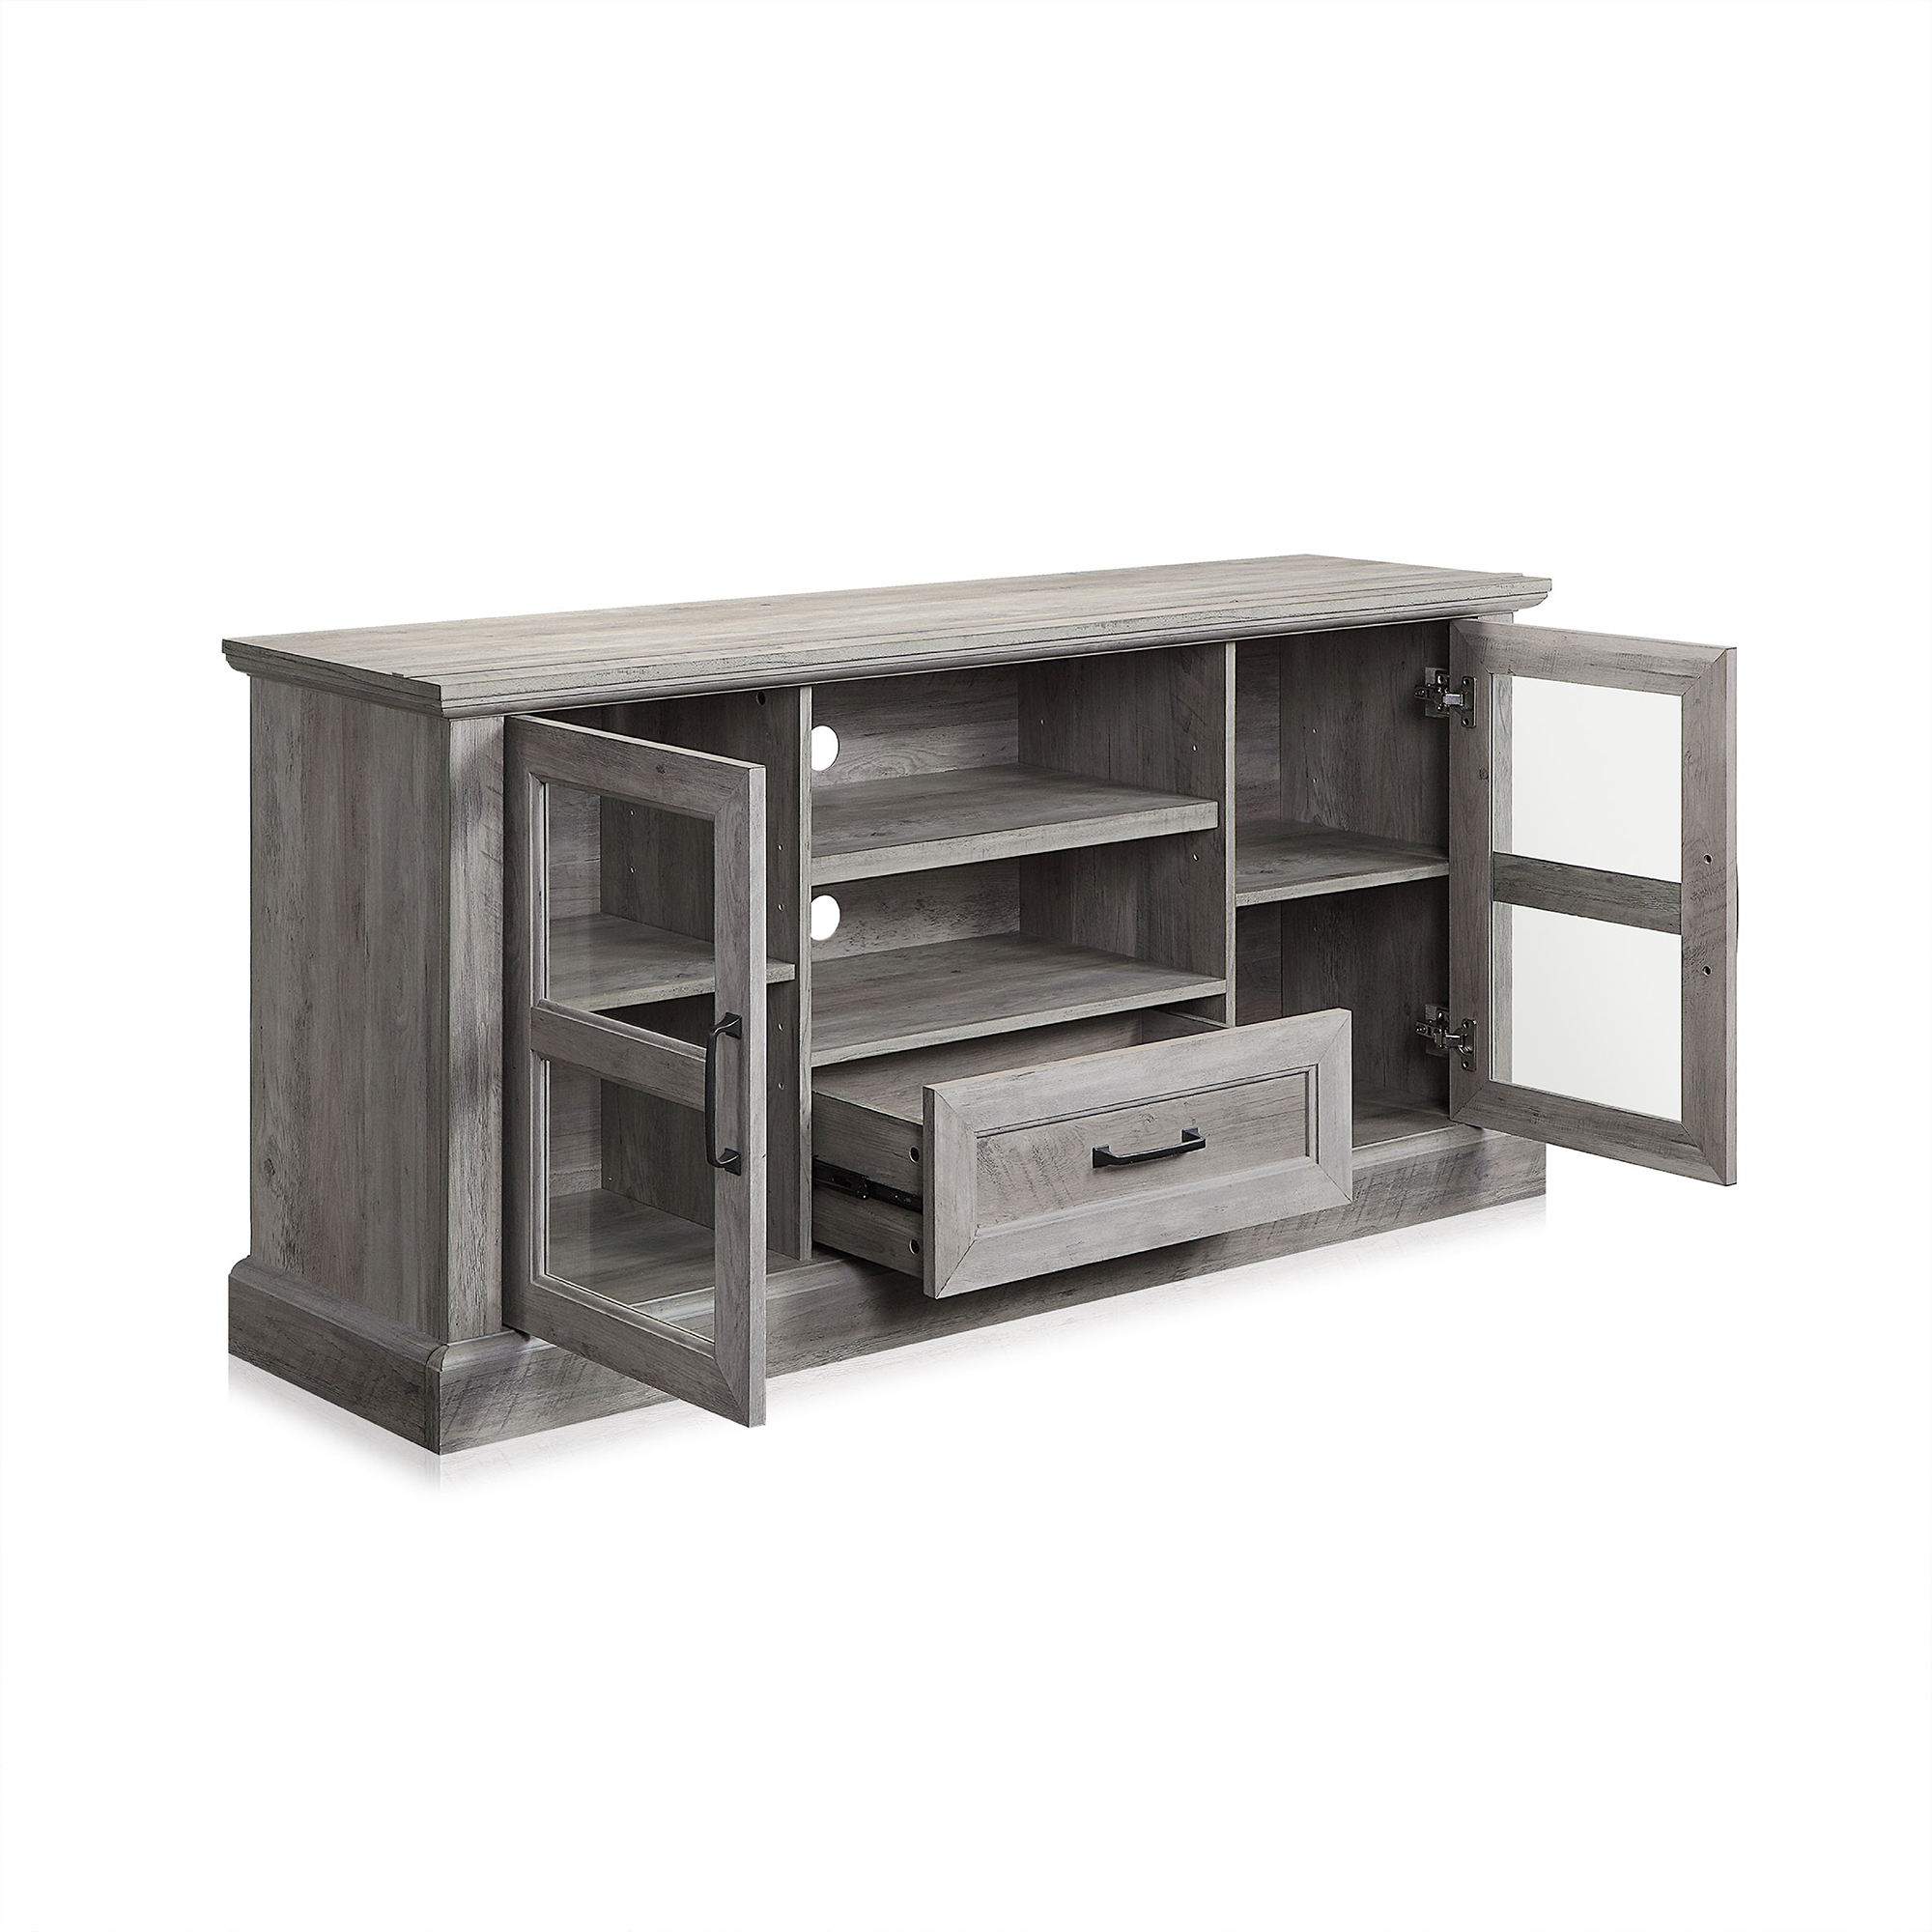 BELLEZE Rustic Modern TV Stand - Trussati (Gray Wash) - image 4 of 7